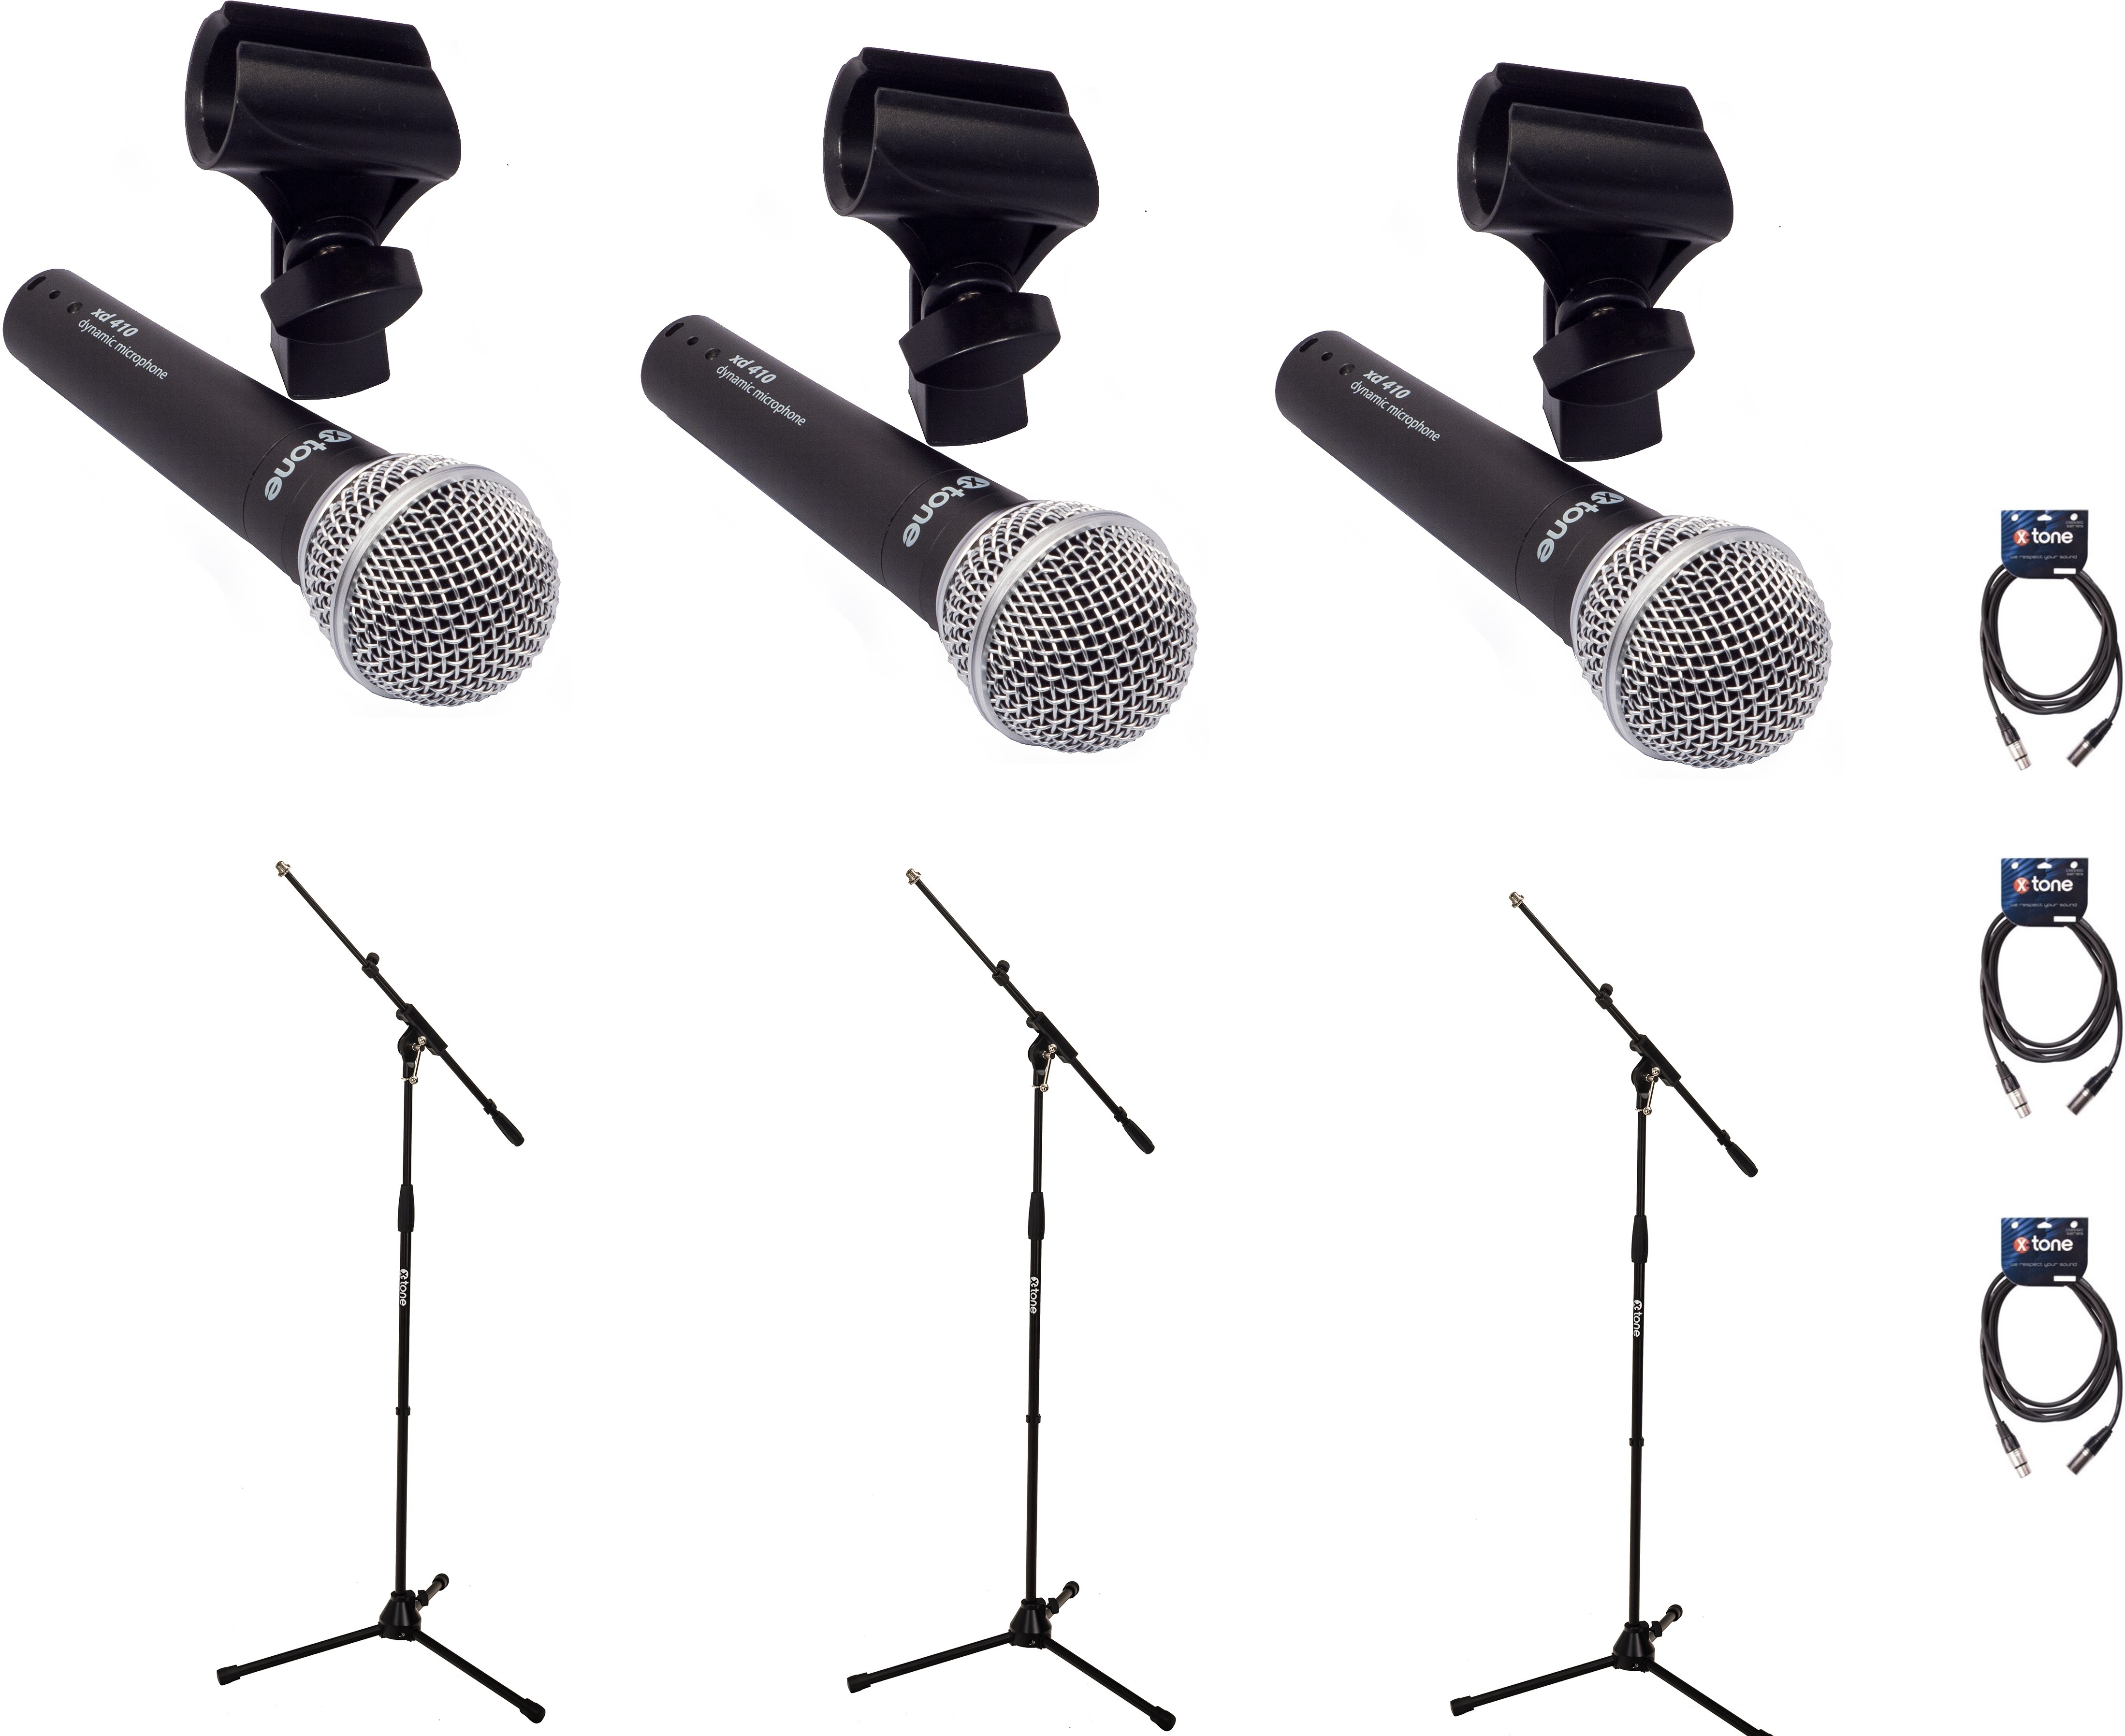 X-tone Bundle 3 Singers - Microphone pack with stand - Main picture